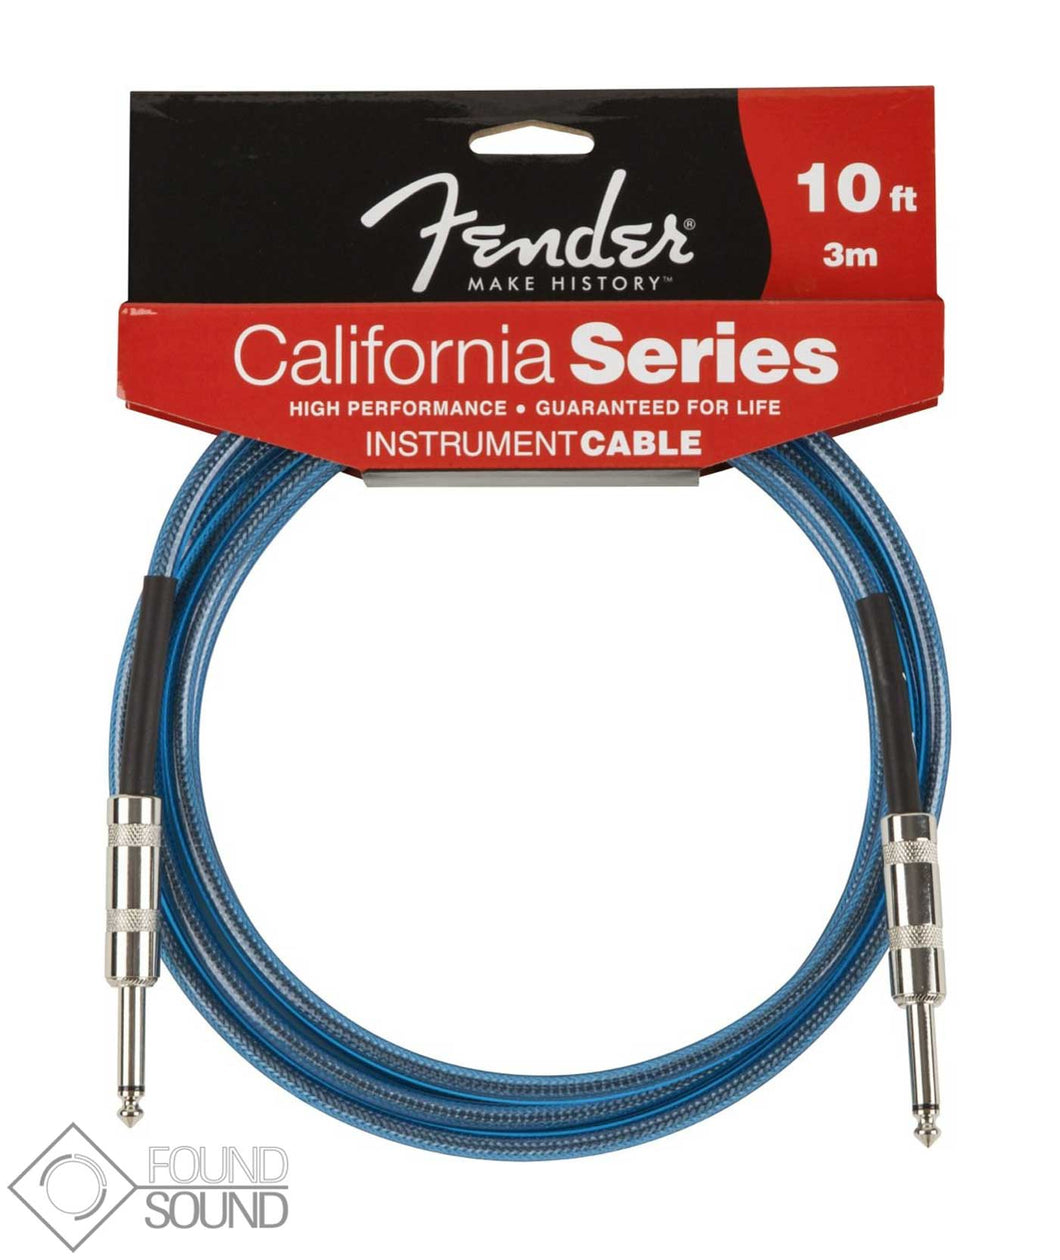 Fender California Series 10 Foot Instrument Cable (Blue)